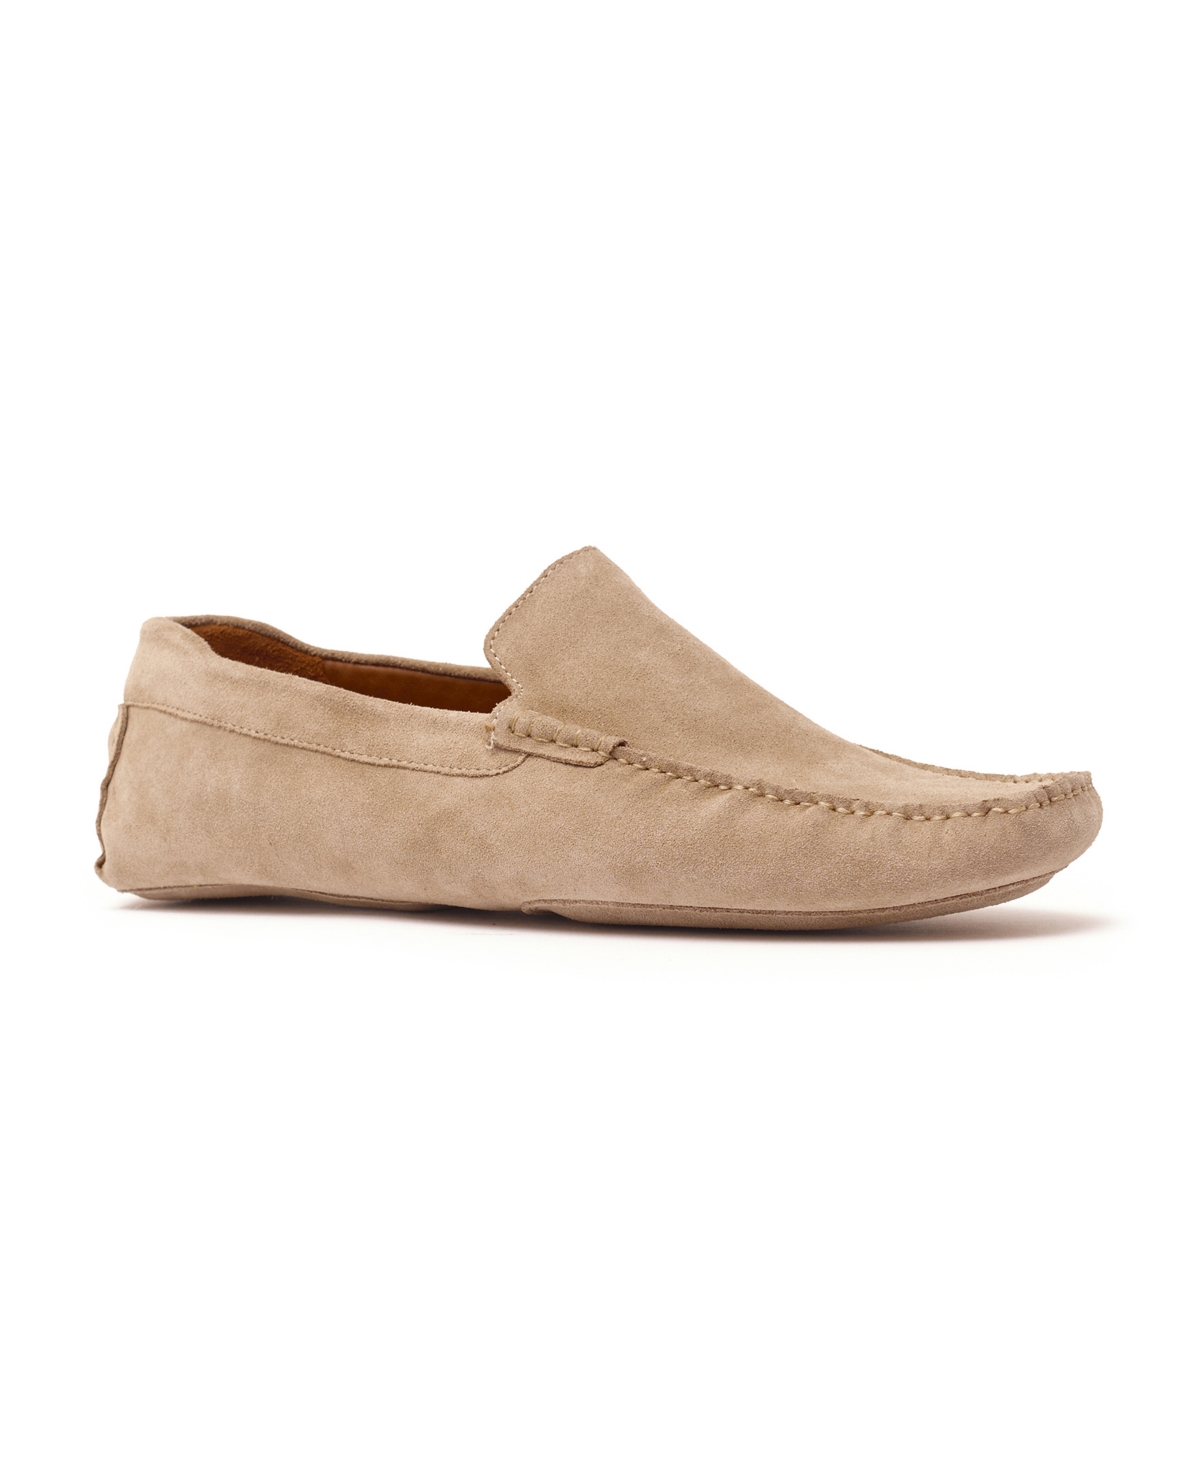 Anthony Veer Men's William House All Suede for Home Loafers Men's Shoes